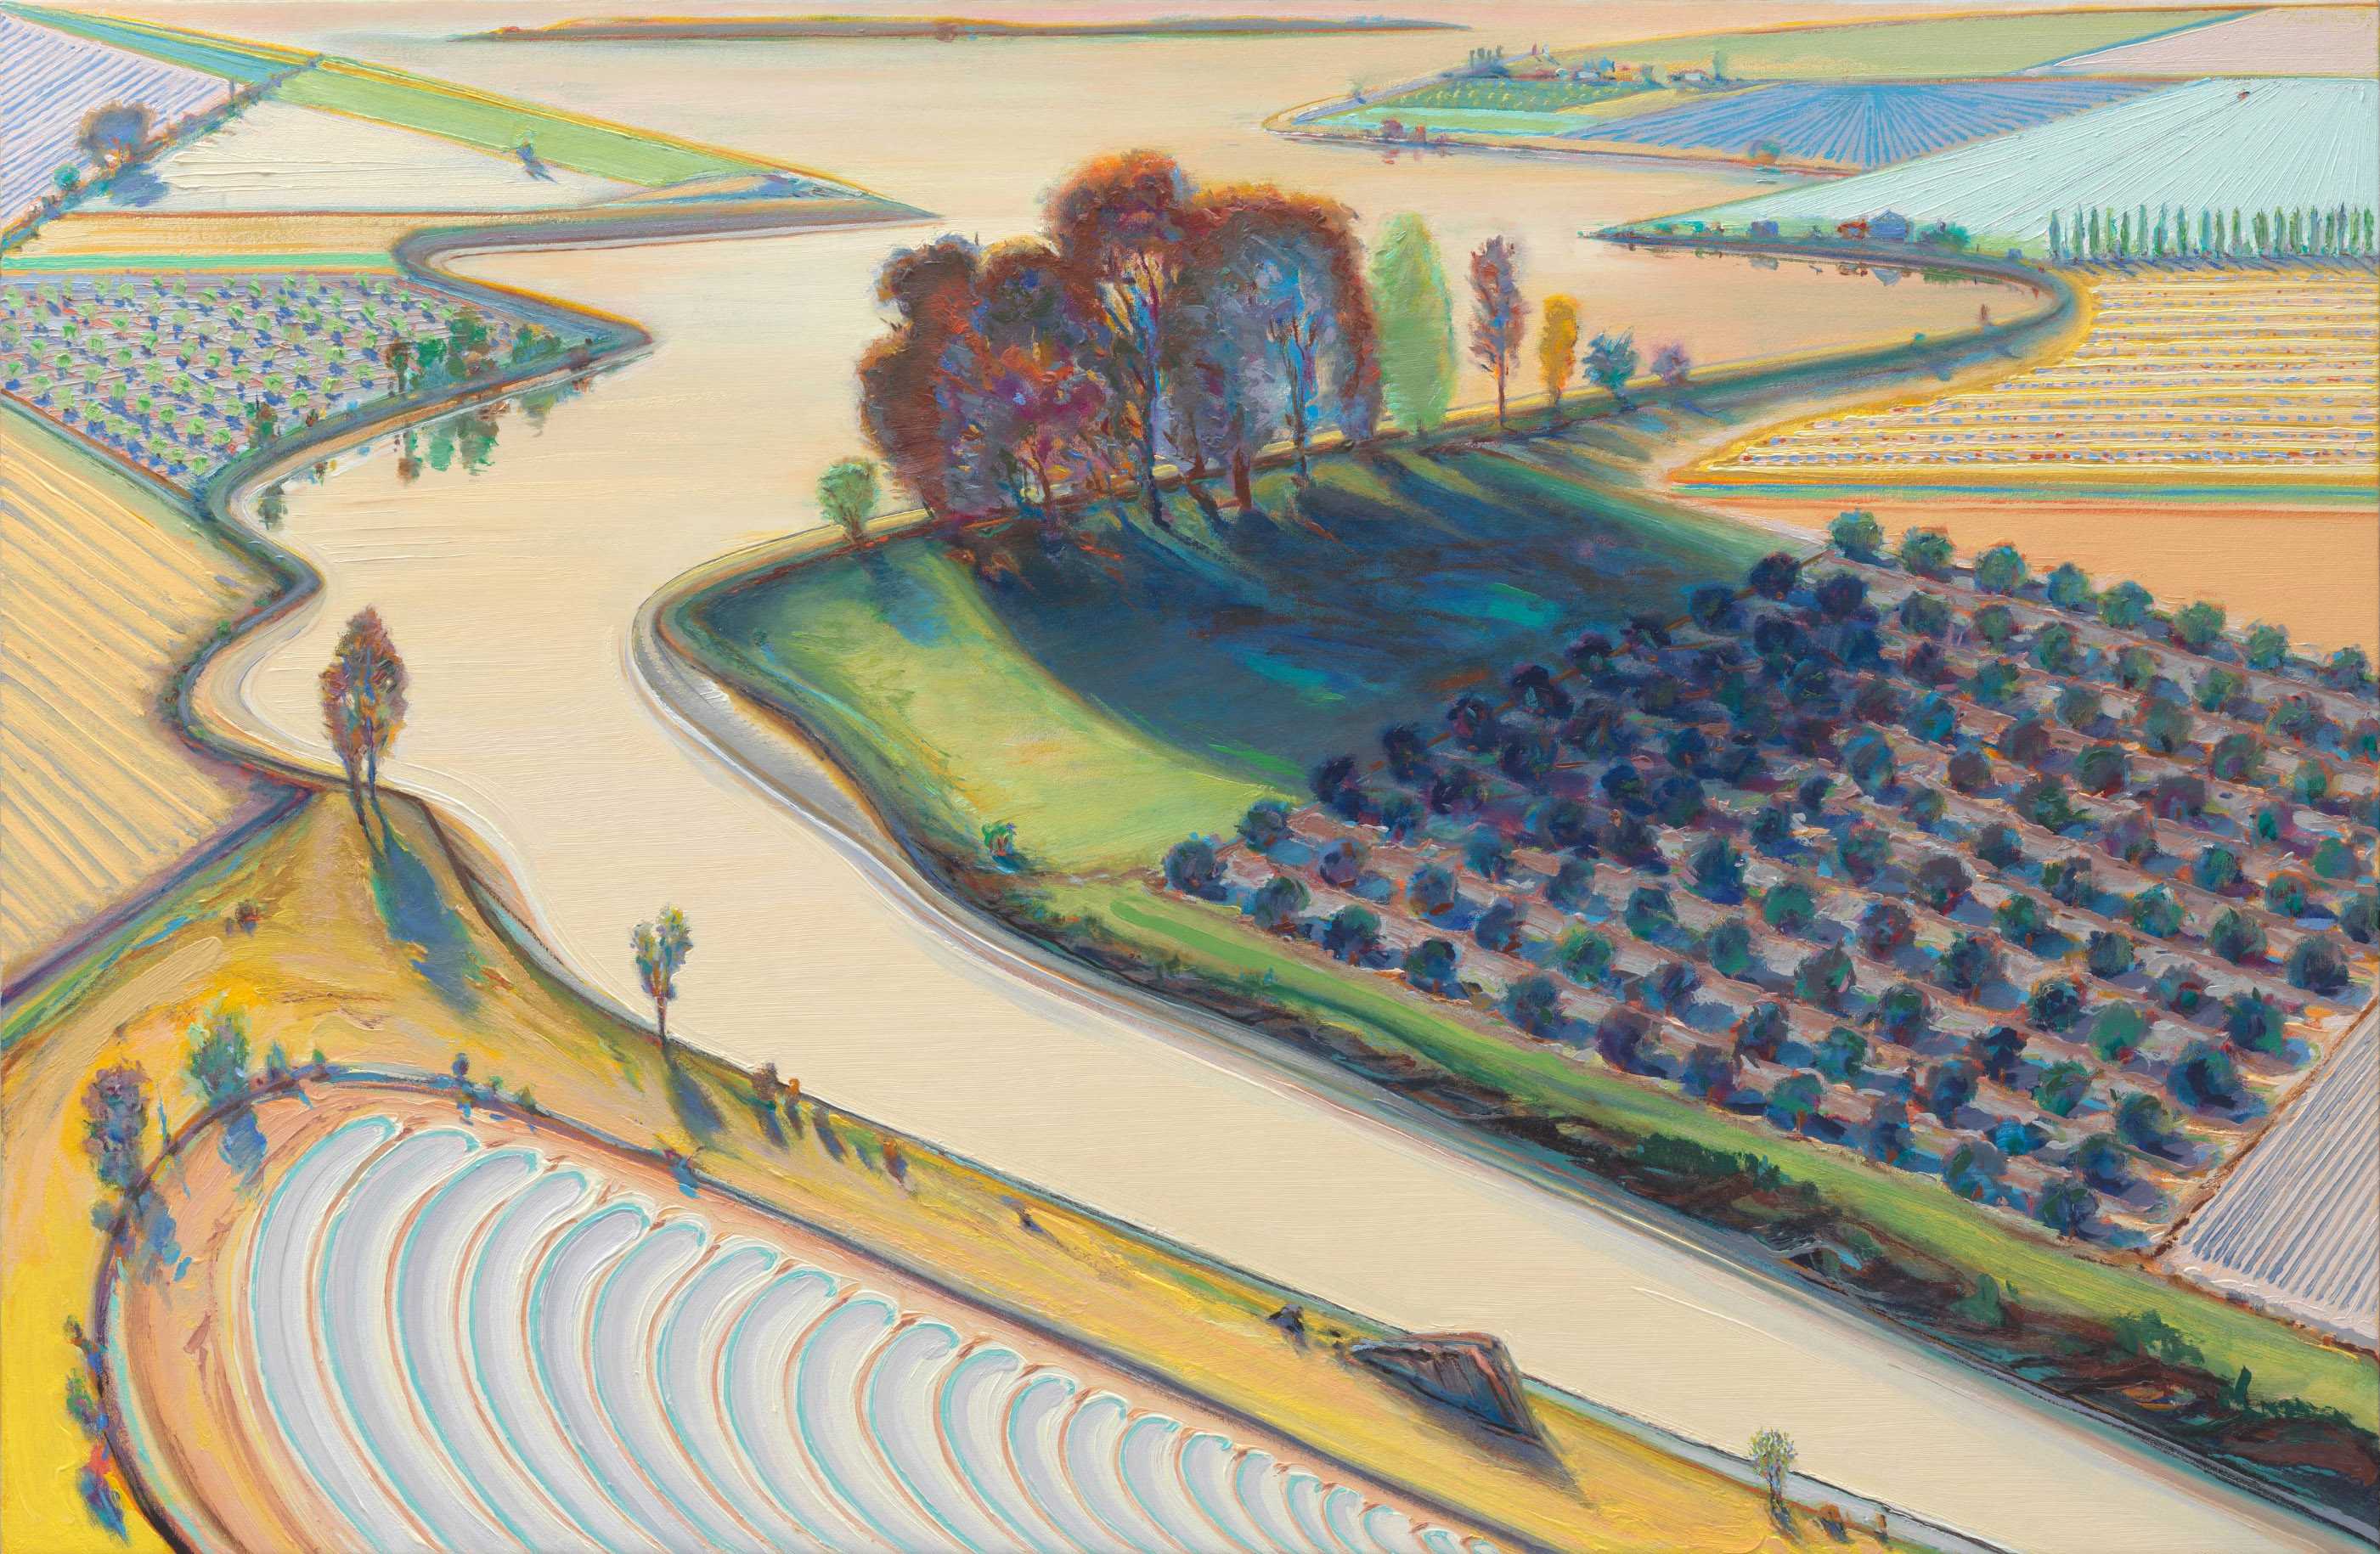 Find out more about Wayne Thiebaud - Flatland River